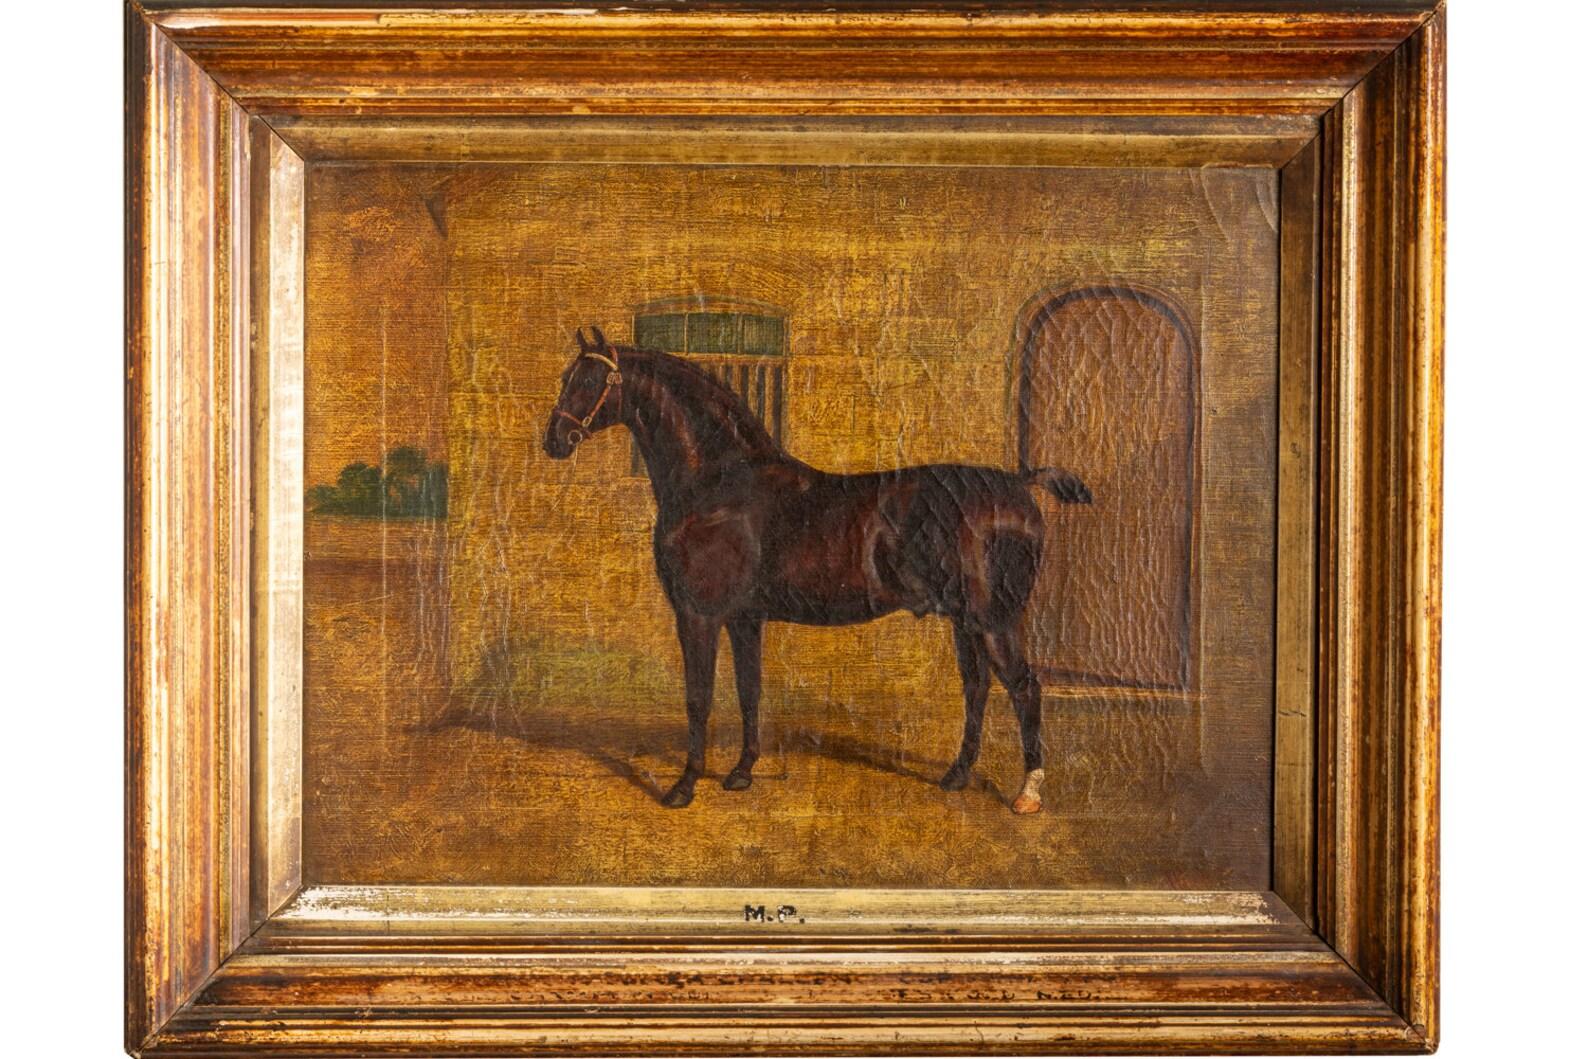 Antique Victorian Late 19th Century circa 1885 Oil Painting By Albert Clark (1843-1928) depicting a hunter horse standing probably outside the stables and painted in the centre of the composition with the visible trees on the second plain. The